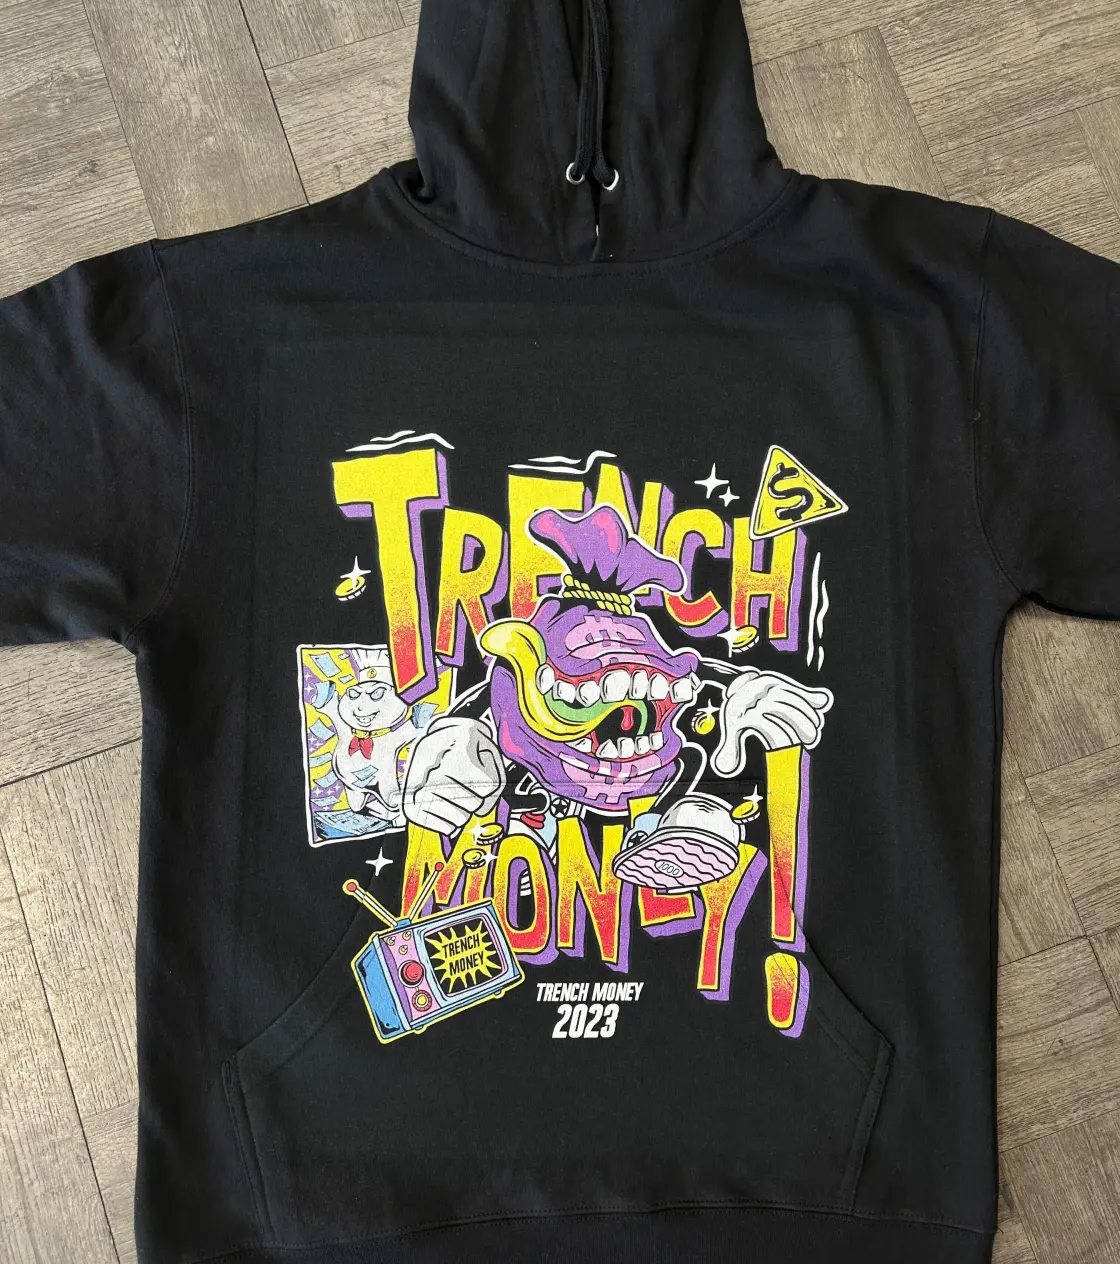 Black hoodie with colorful print on it